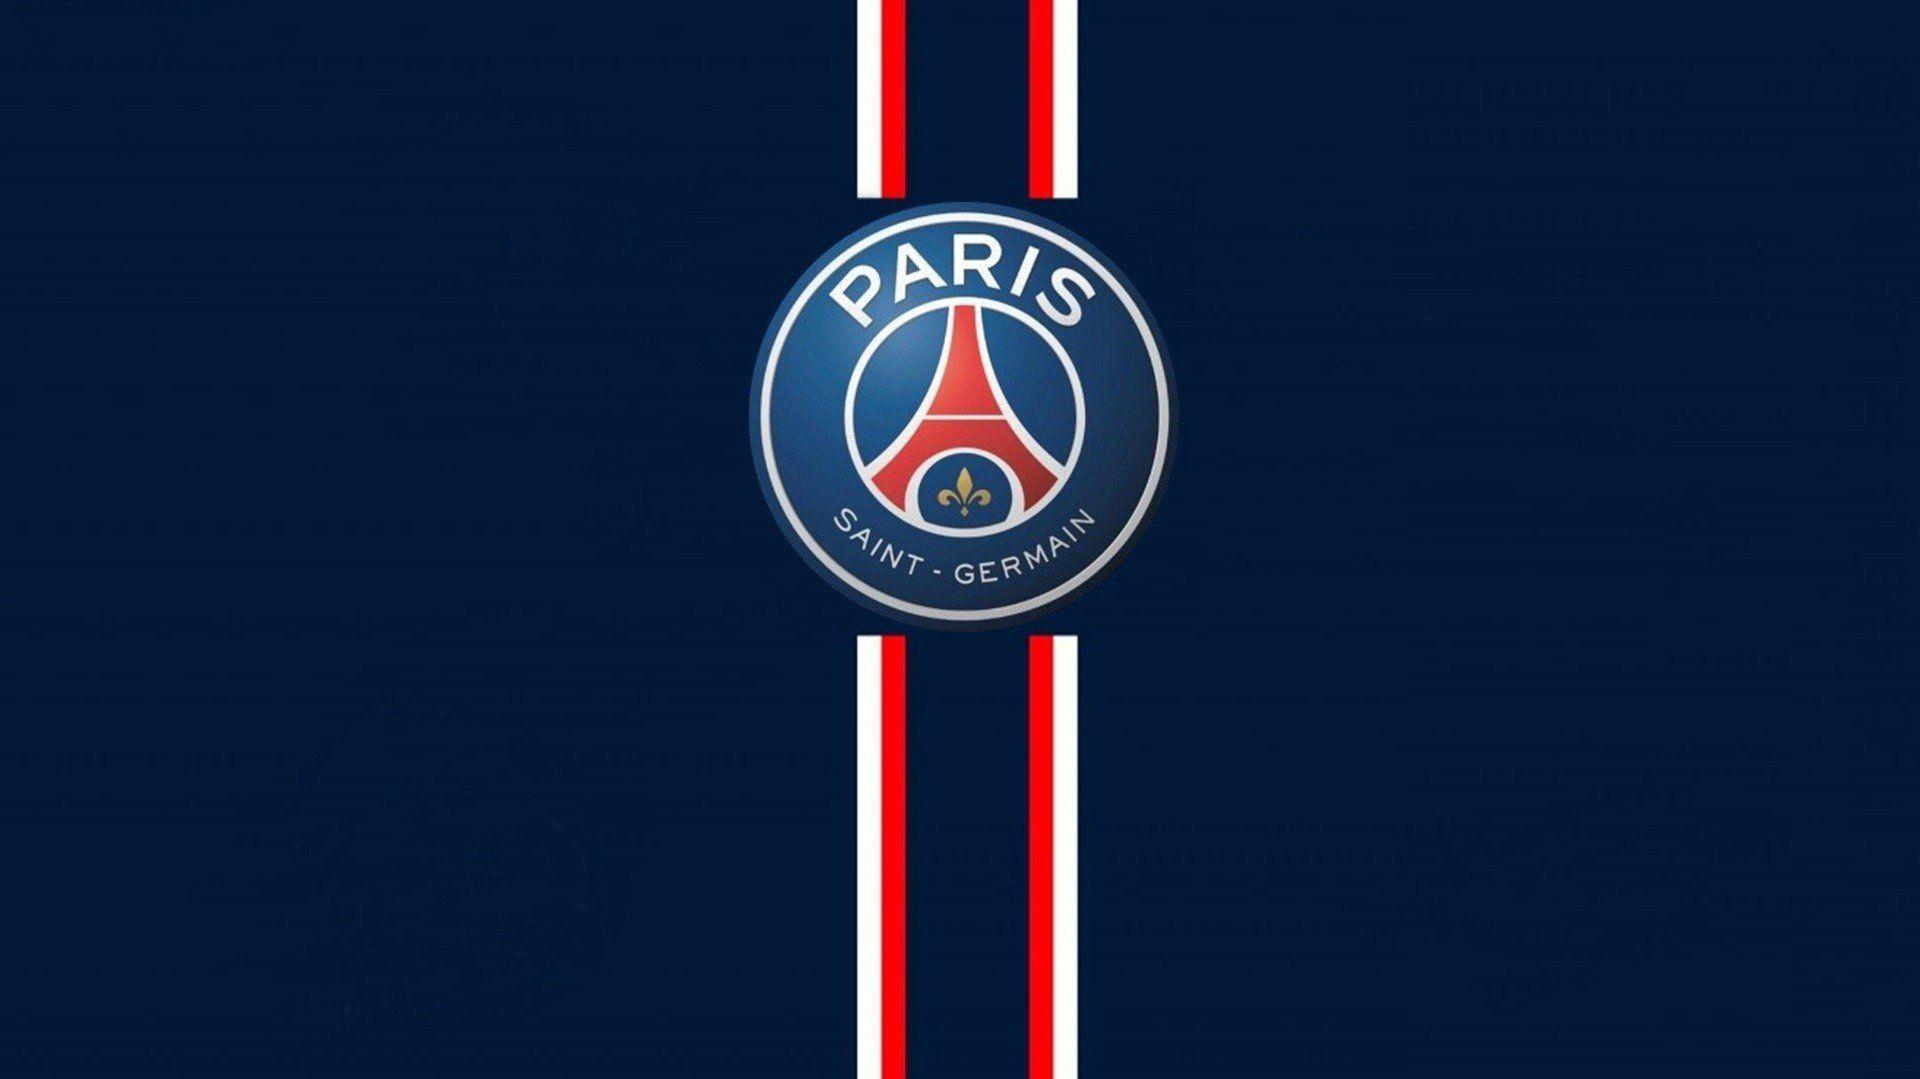 145 Wallpaper Bola Psg Images & Pictures - MyWeb